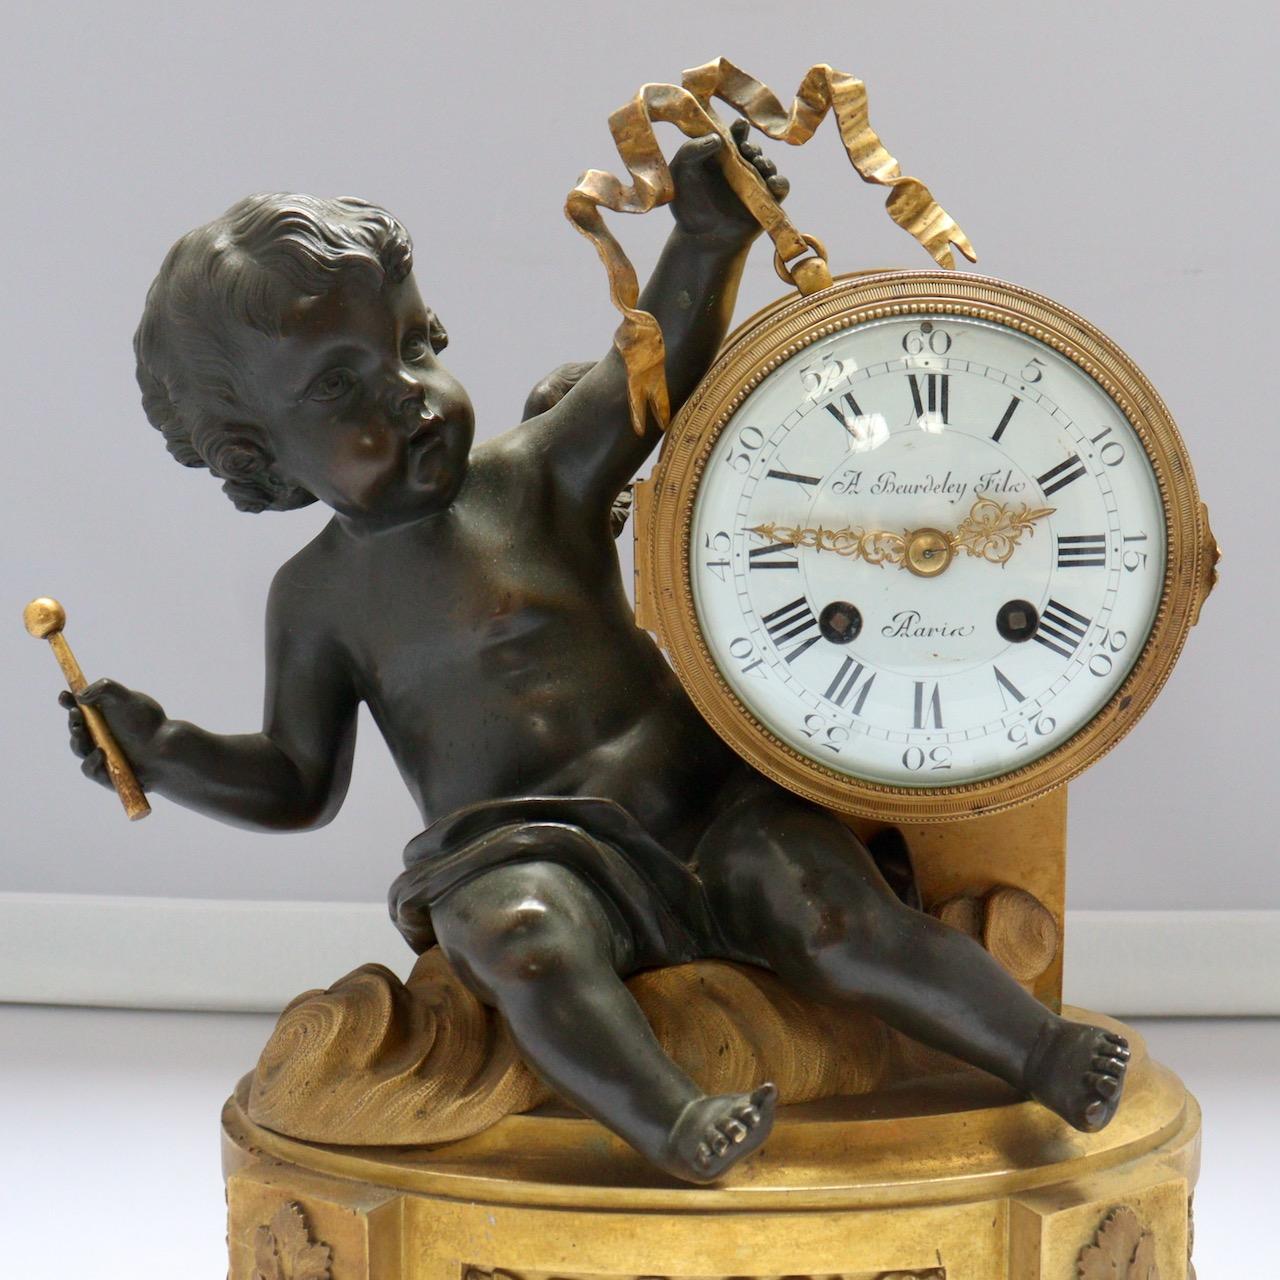 Chased Ormolu and Patinated Mantelpiece designed as a Cupid with a Drum
The porcelain dial enamelled with Arabic and Roman numerals
Bevelled Glass
Signed A.Beurdeley Fils Paris
The pendulum by Japy Frères 
Louis XVI style
Circa 1875

In